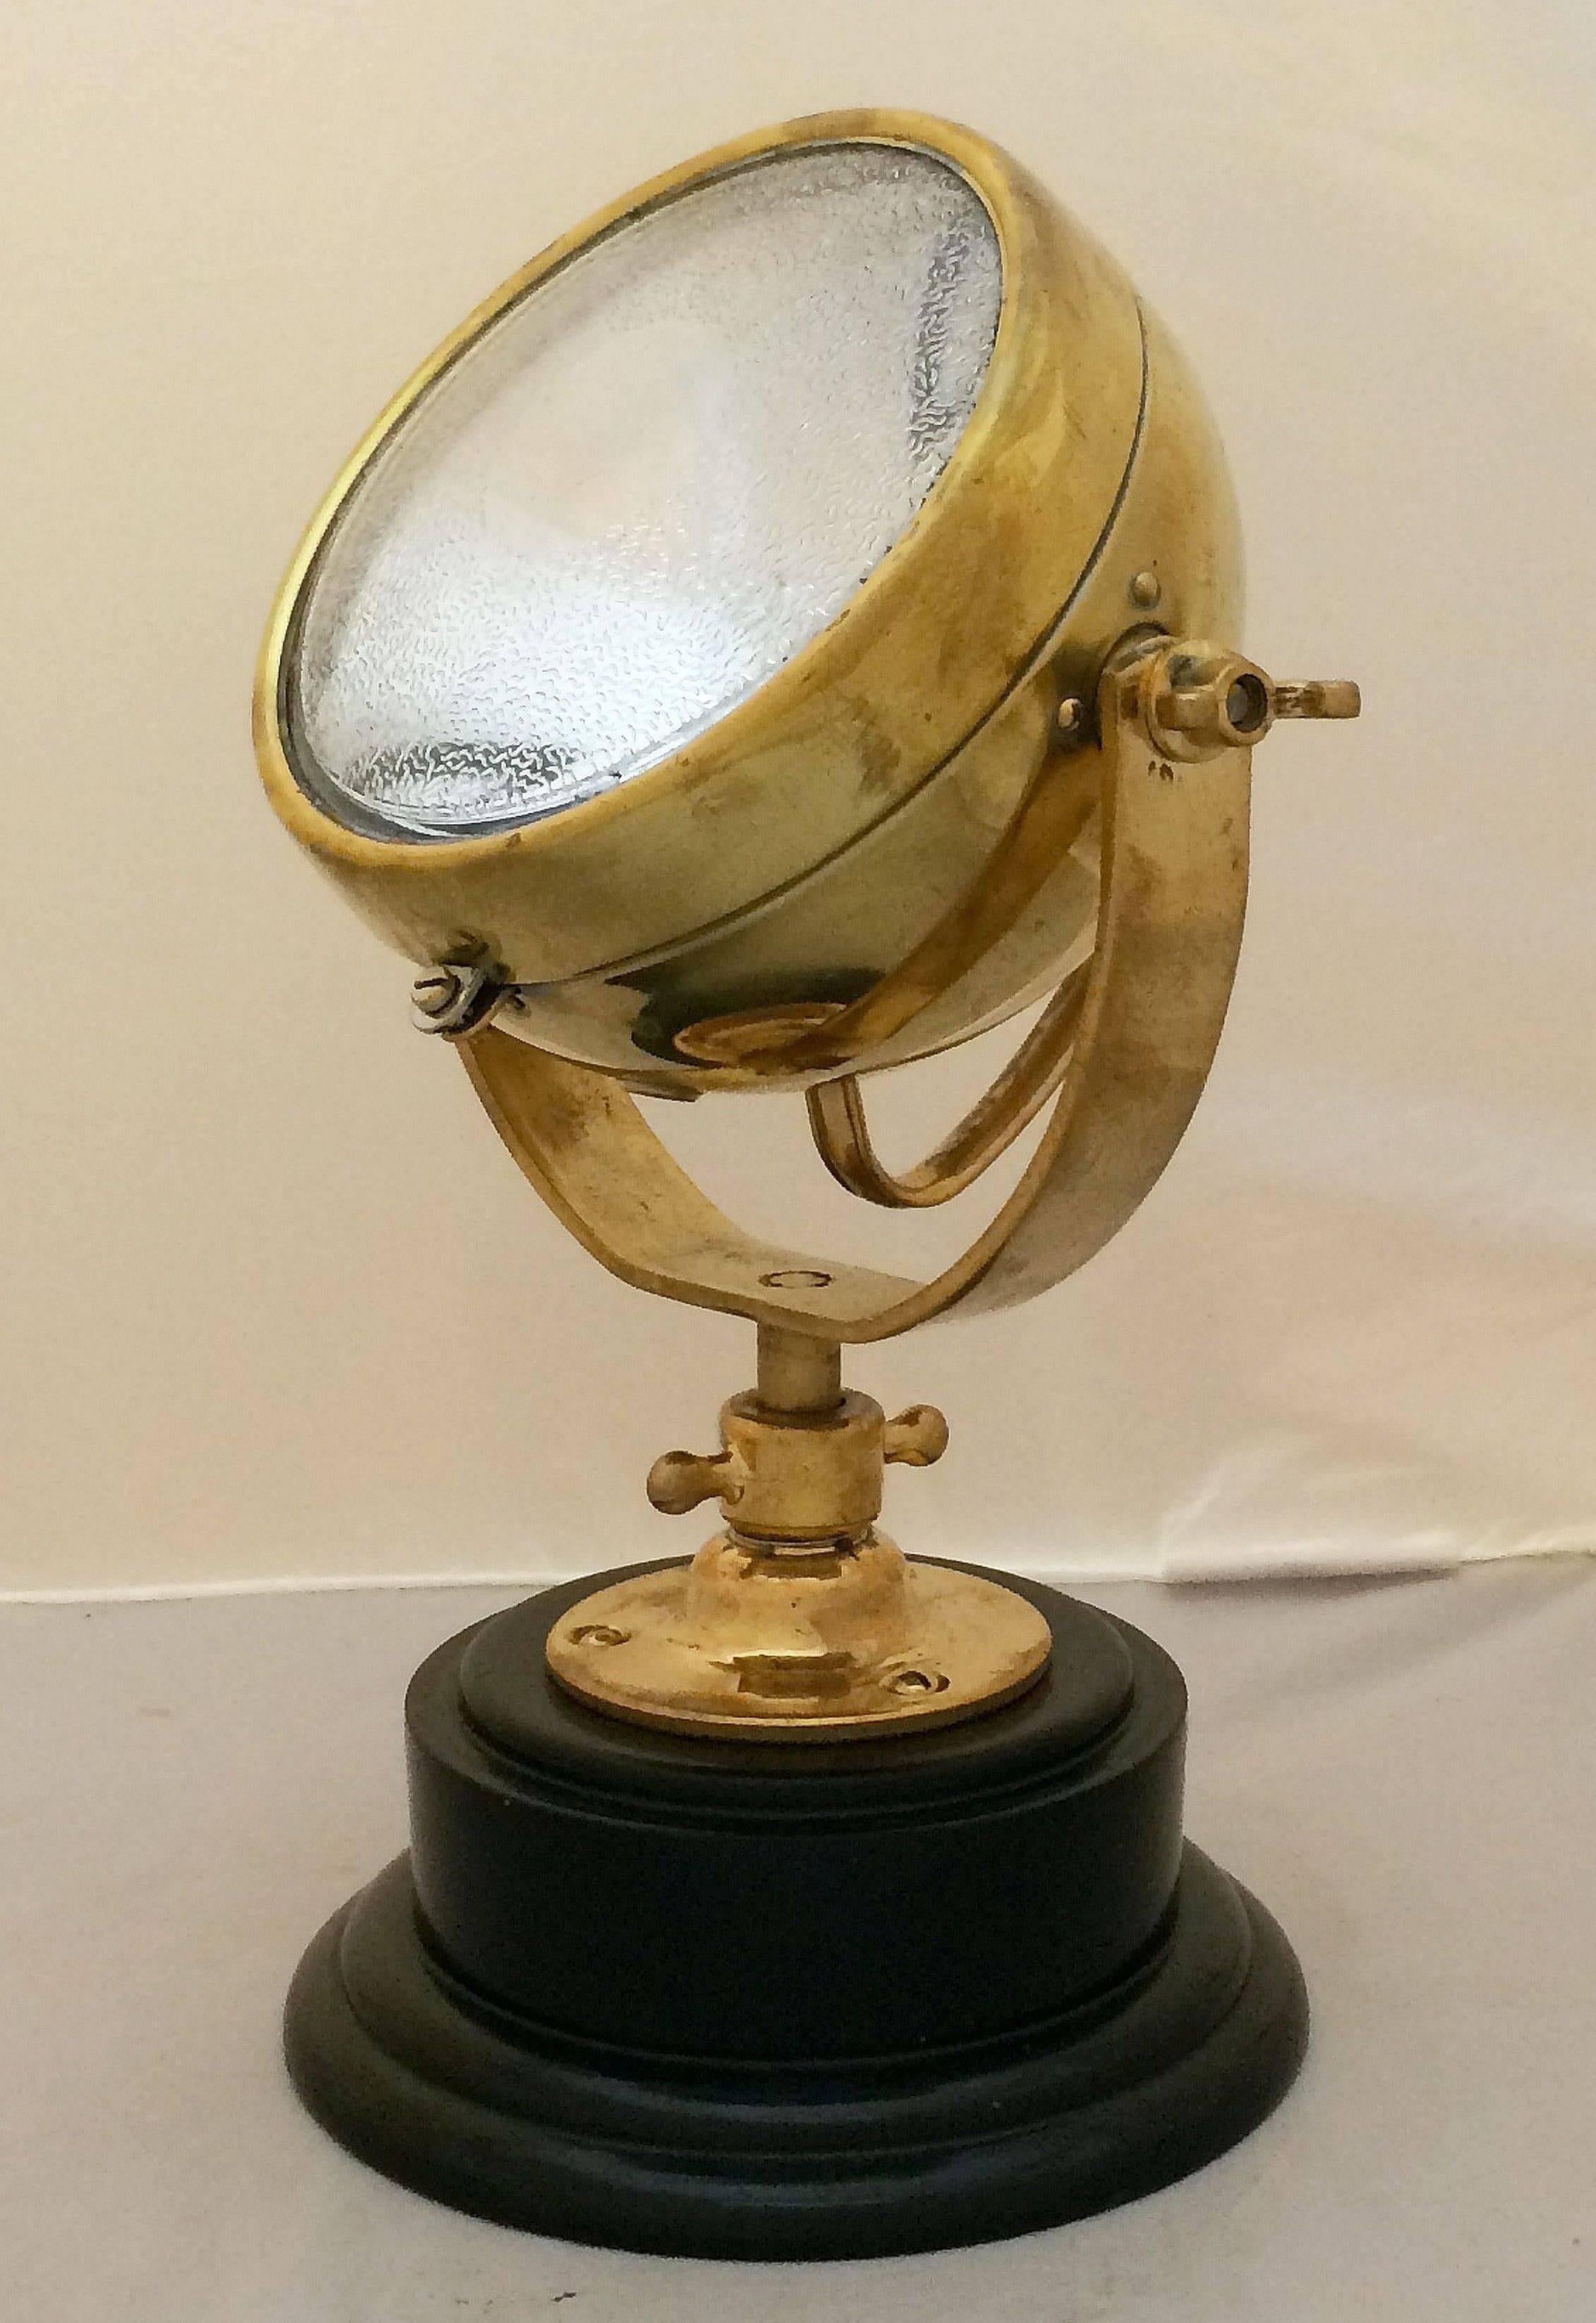 A vintage English adjustable fire truck or marine search light (lamp or lantern) of brass, mounted to a round ebonized wooden stand by Raydyot, circa 1940.

With brass stamp: Made in England, Raydyot.